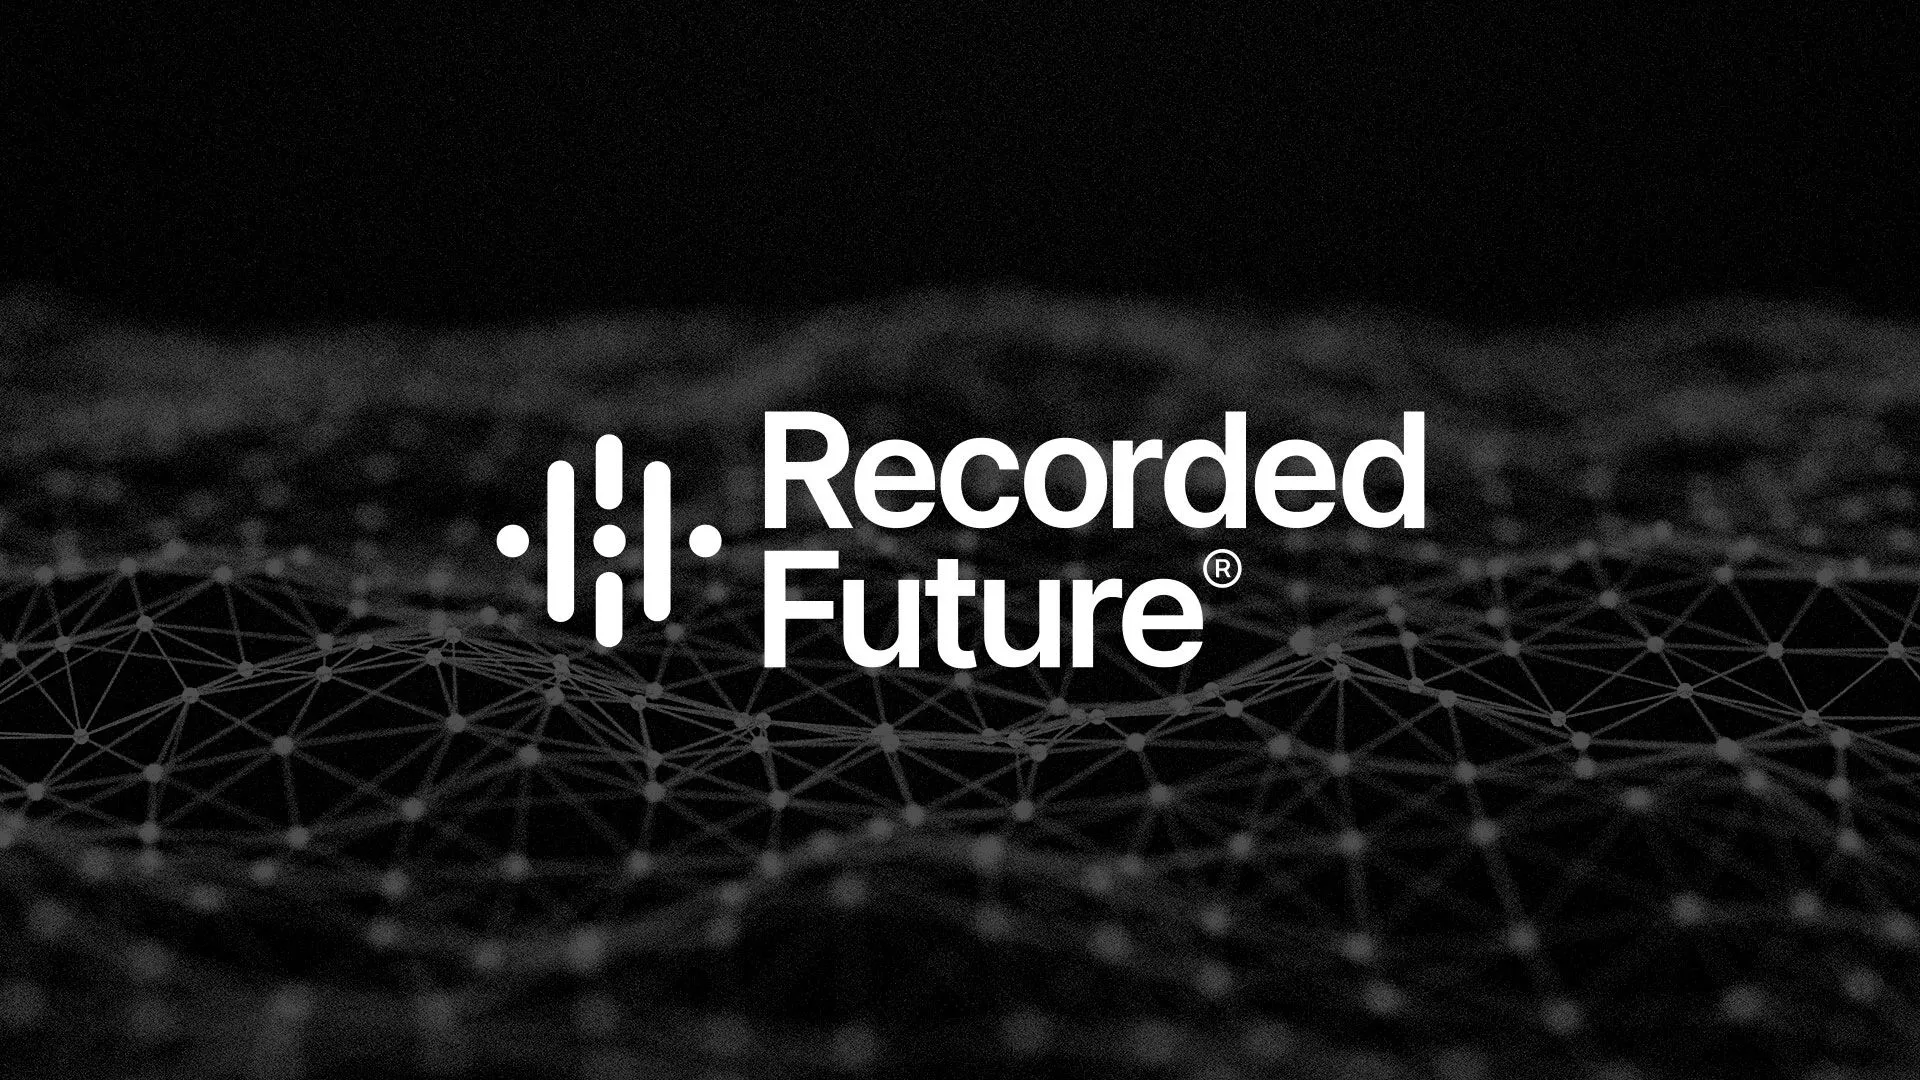 Press Release: Recorded Future Adds Technical Threat Intelligence to Fuel All-Source Analysis Breakthrough